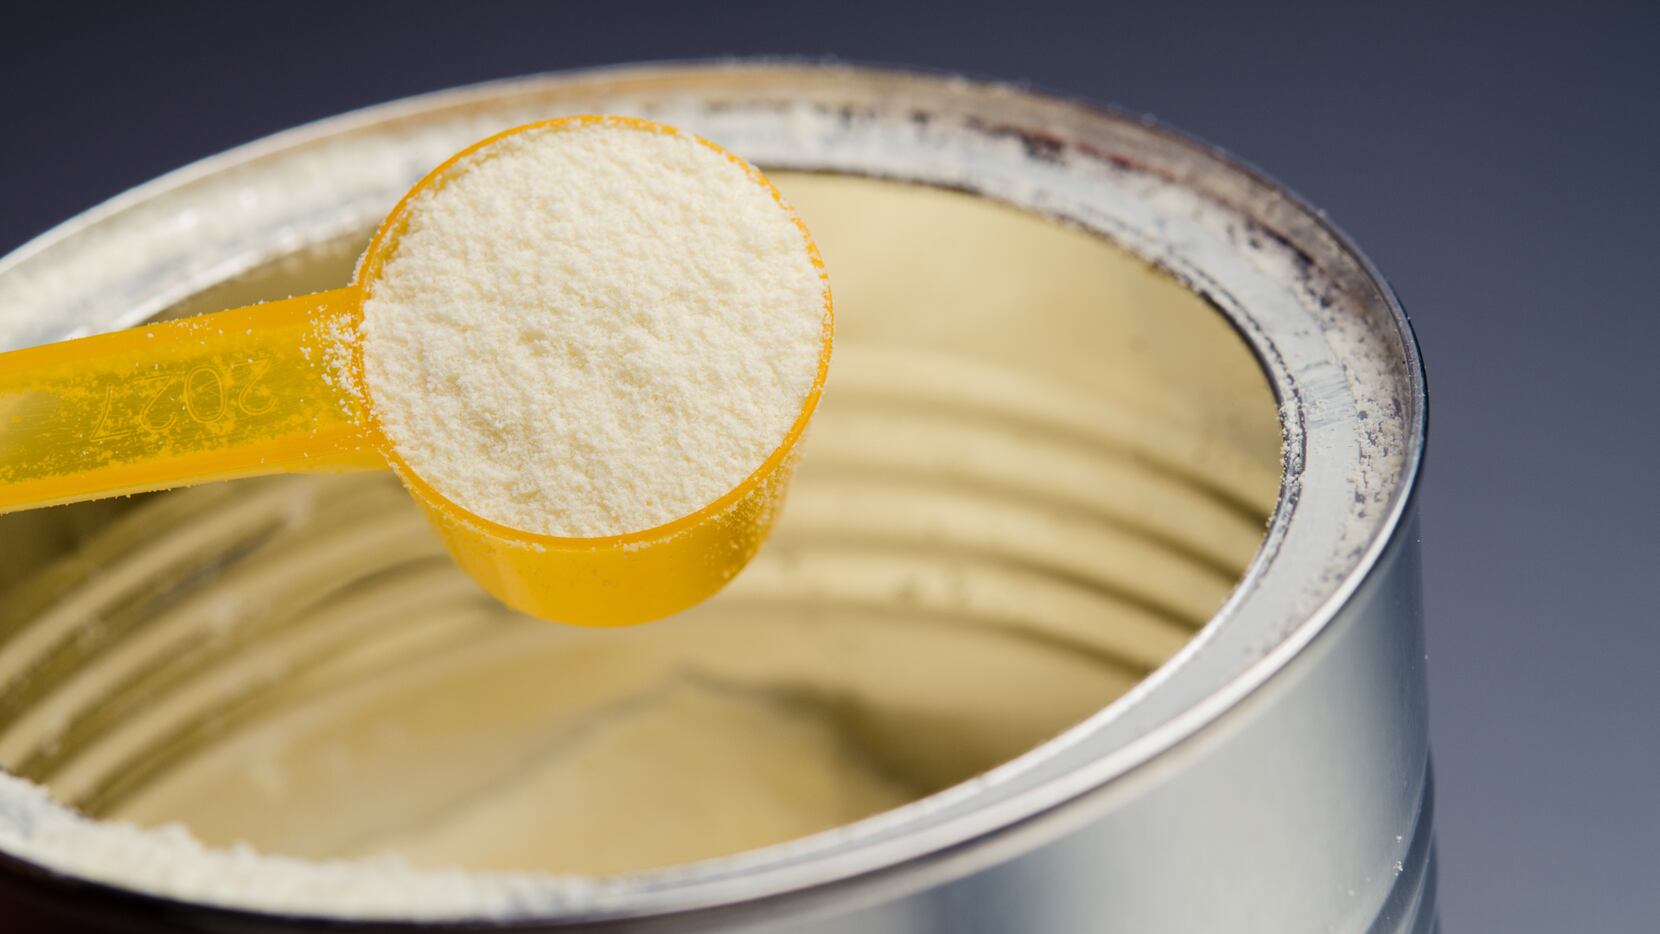 A close-up of baby formula powder in a can.